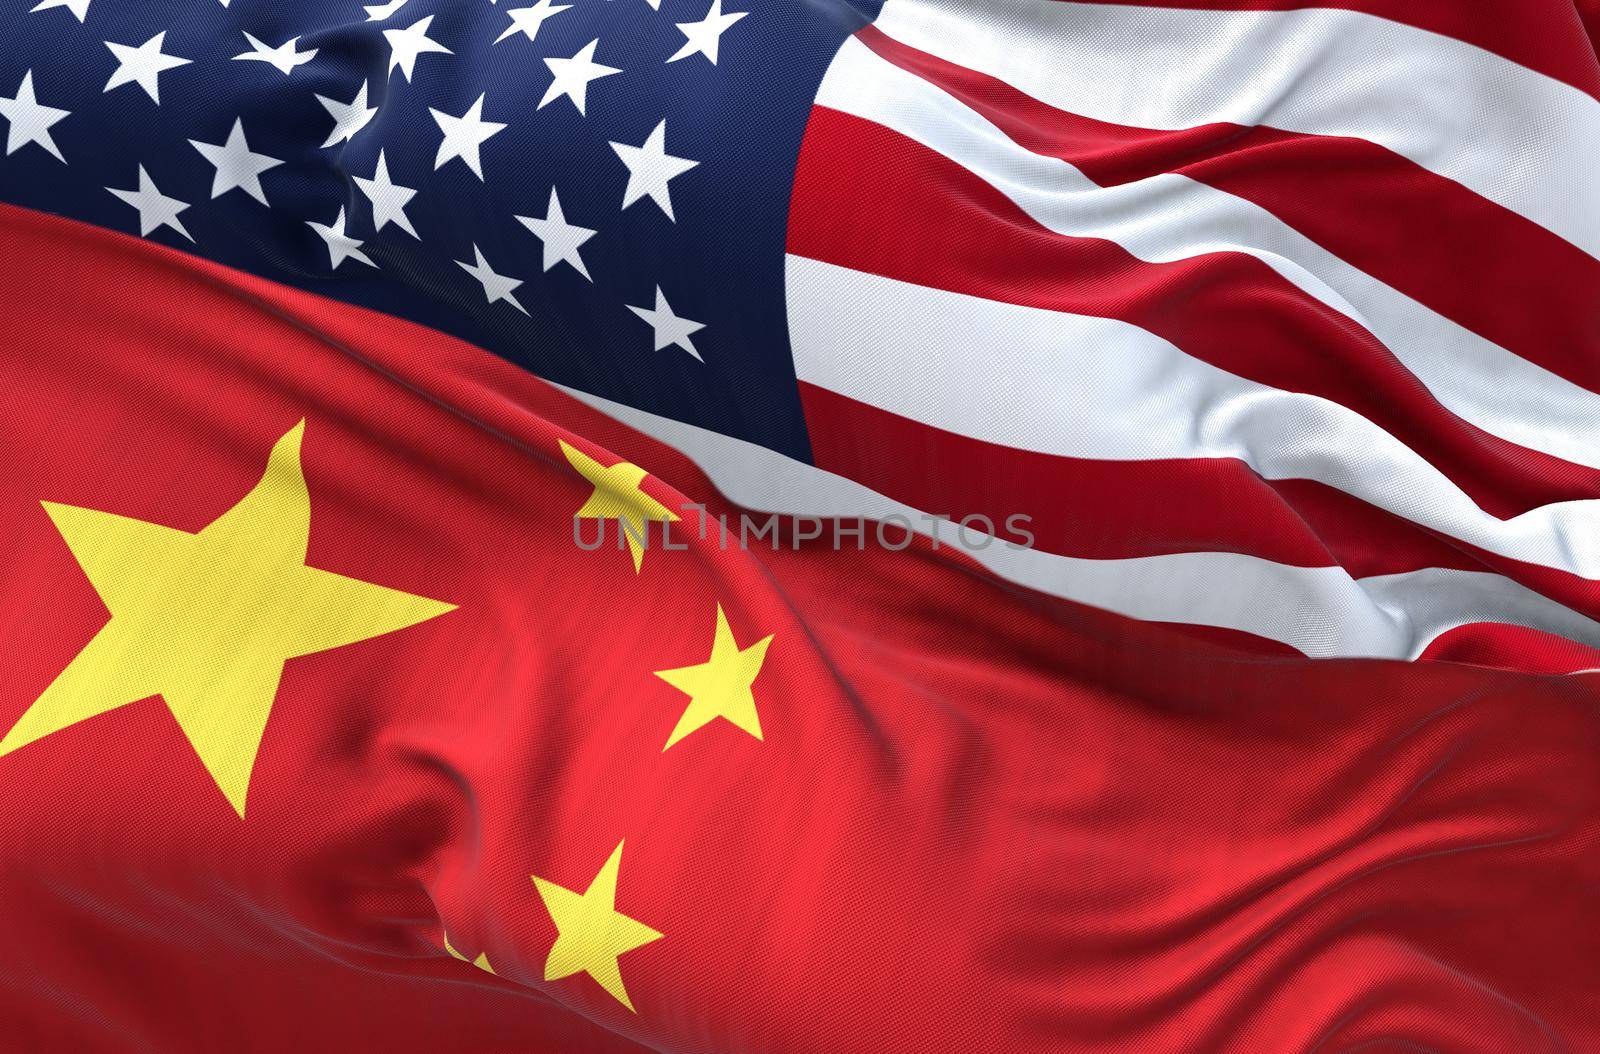 The flags of China and the United States of America waving by rarrarorro